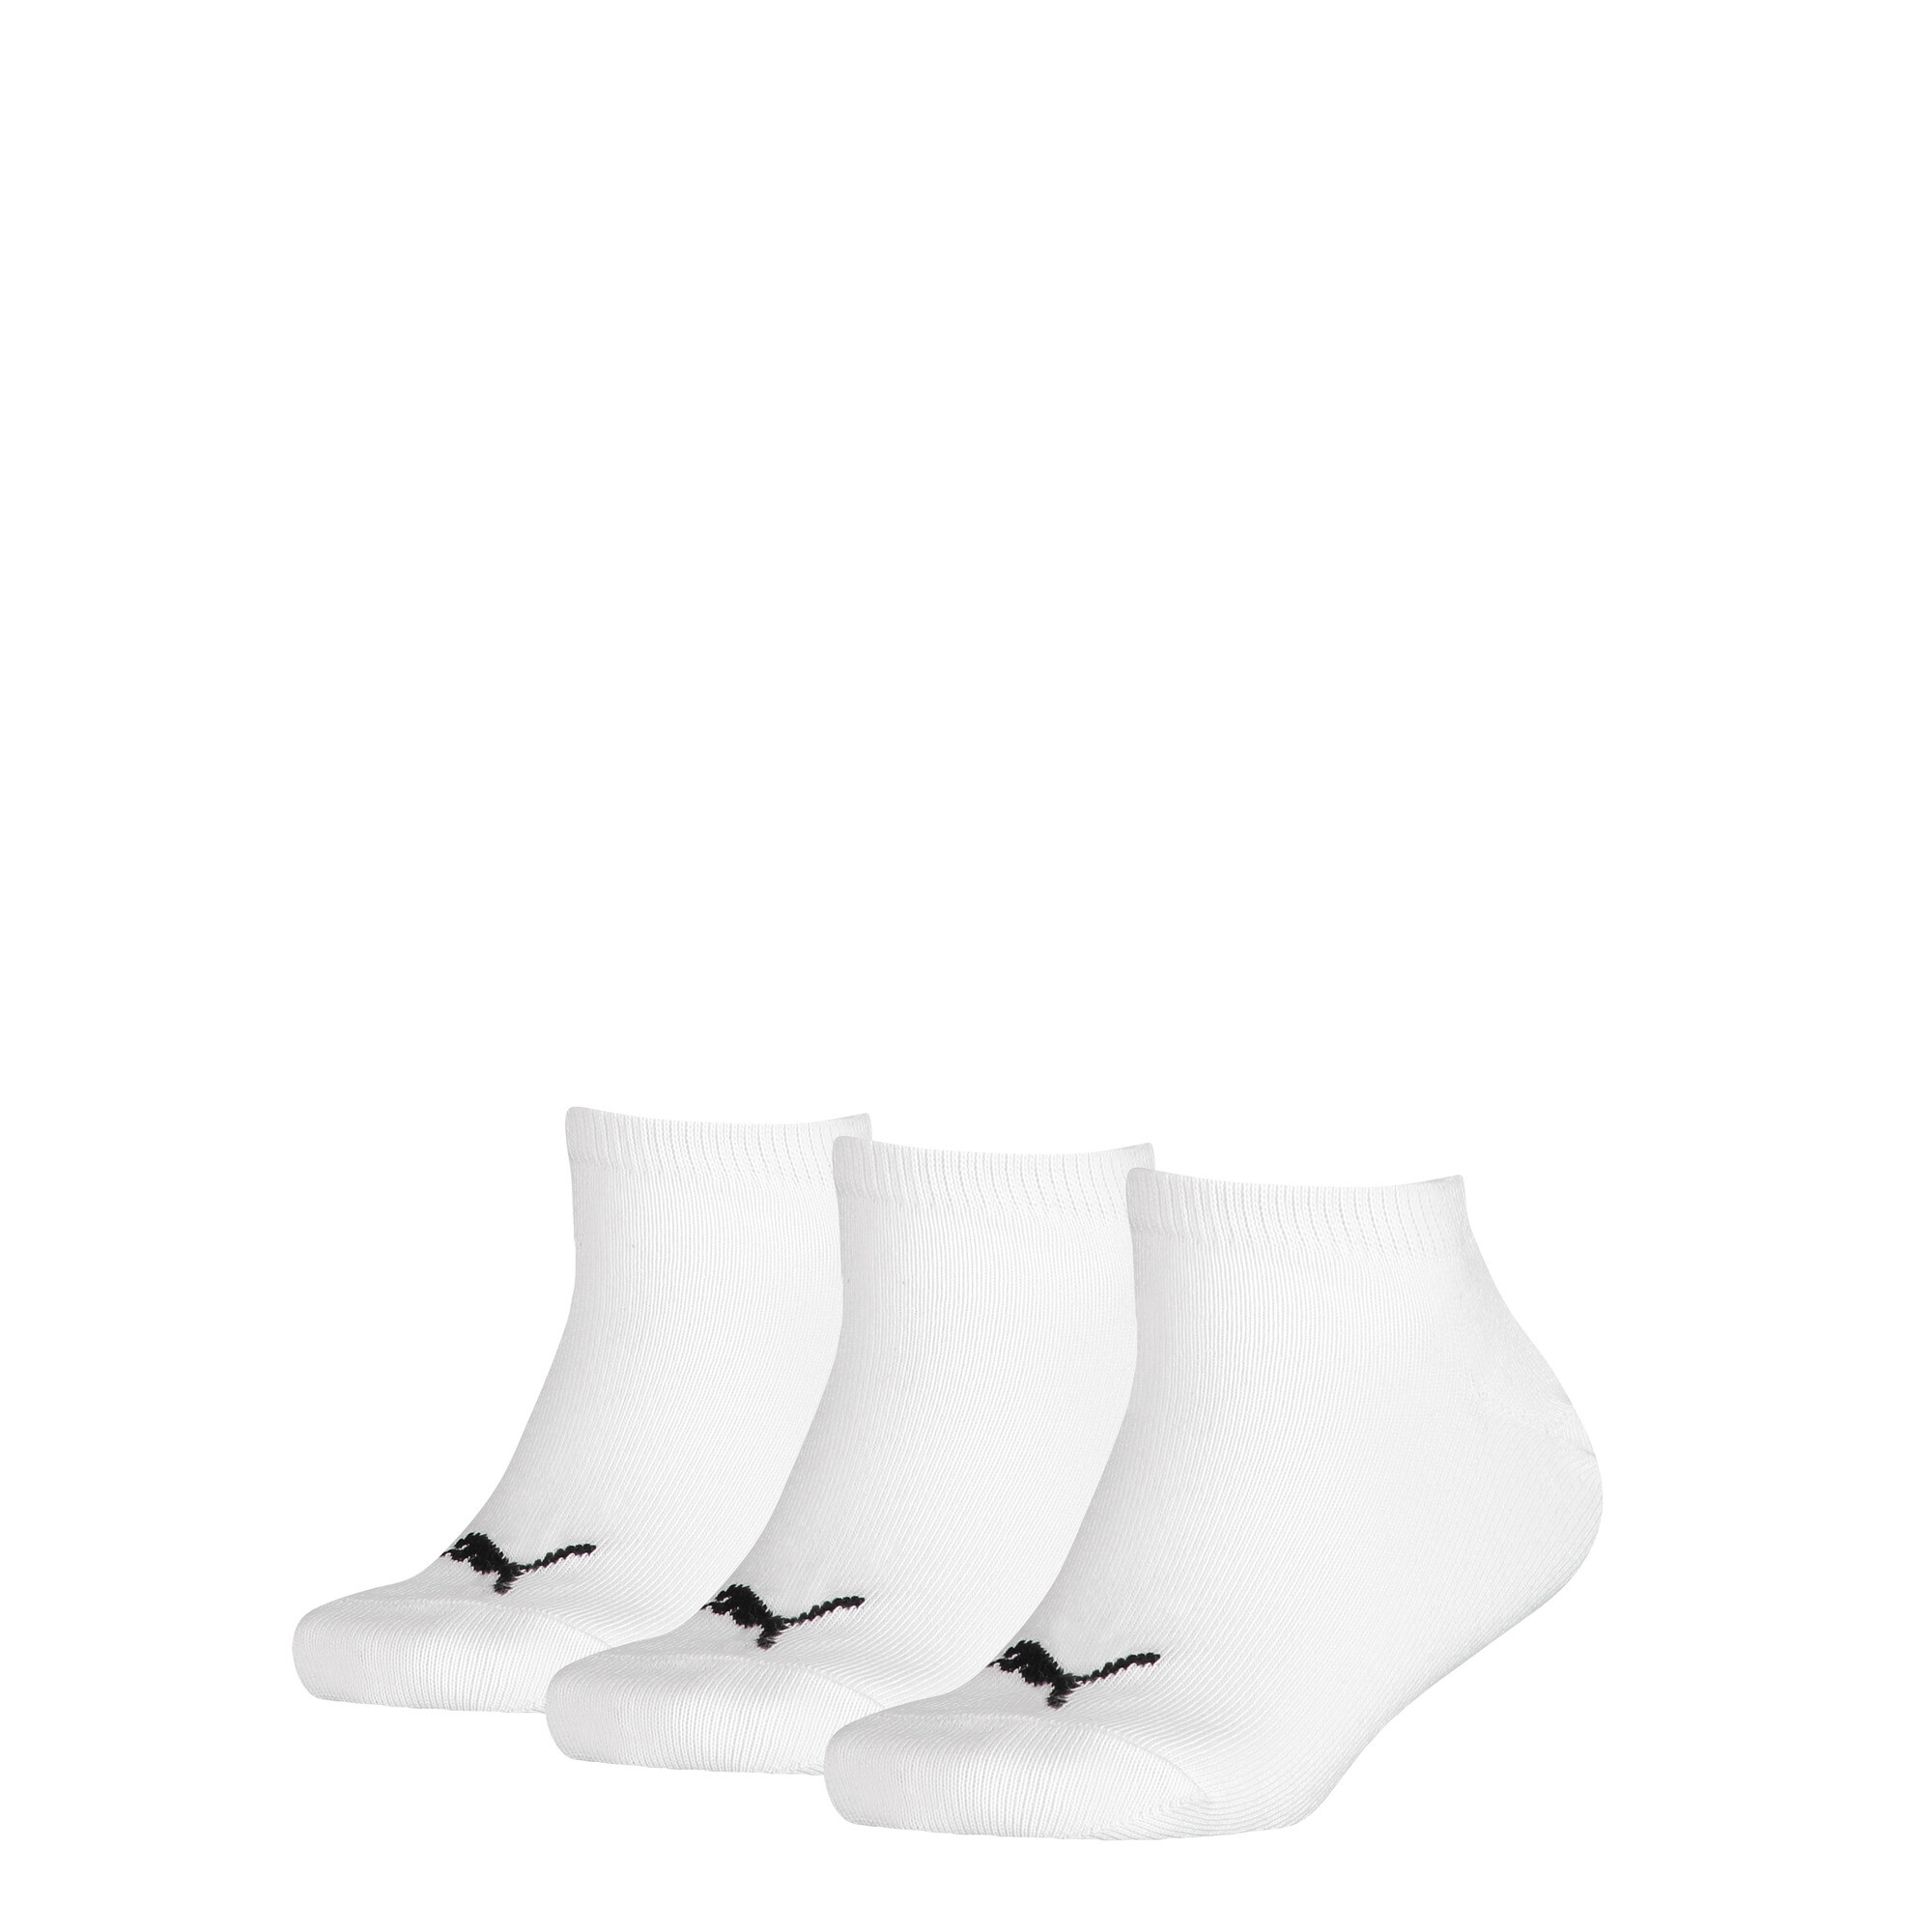 Kids' PUMA Invisible Socks 3 Pack In White, Size 35-38